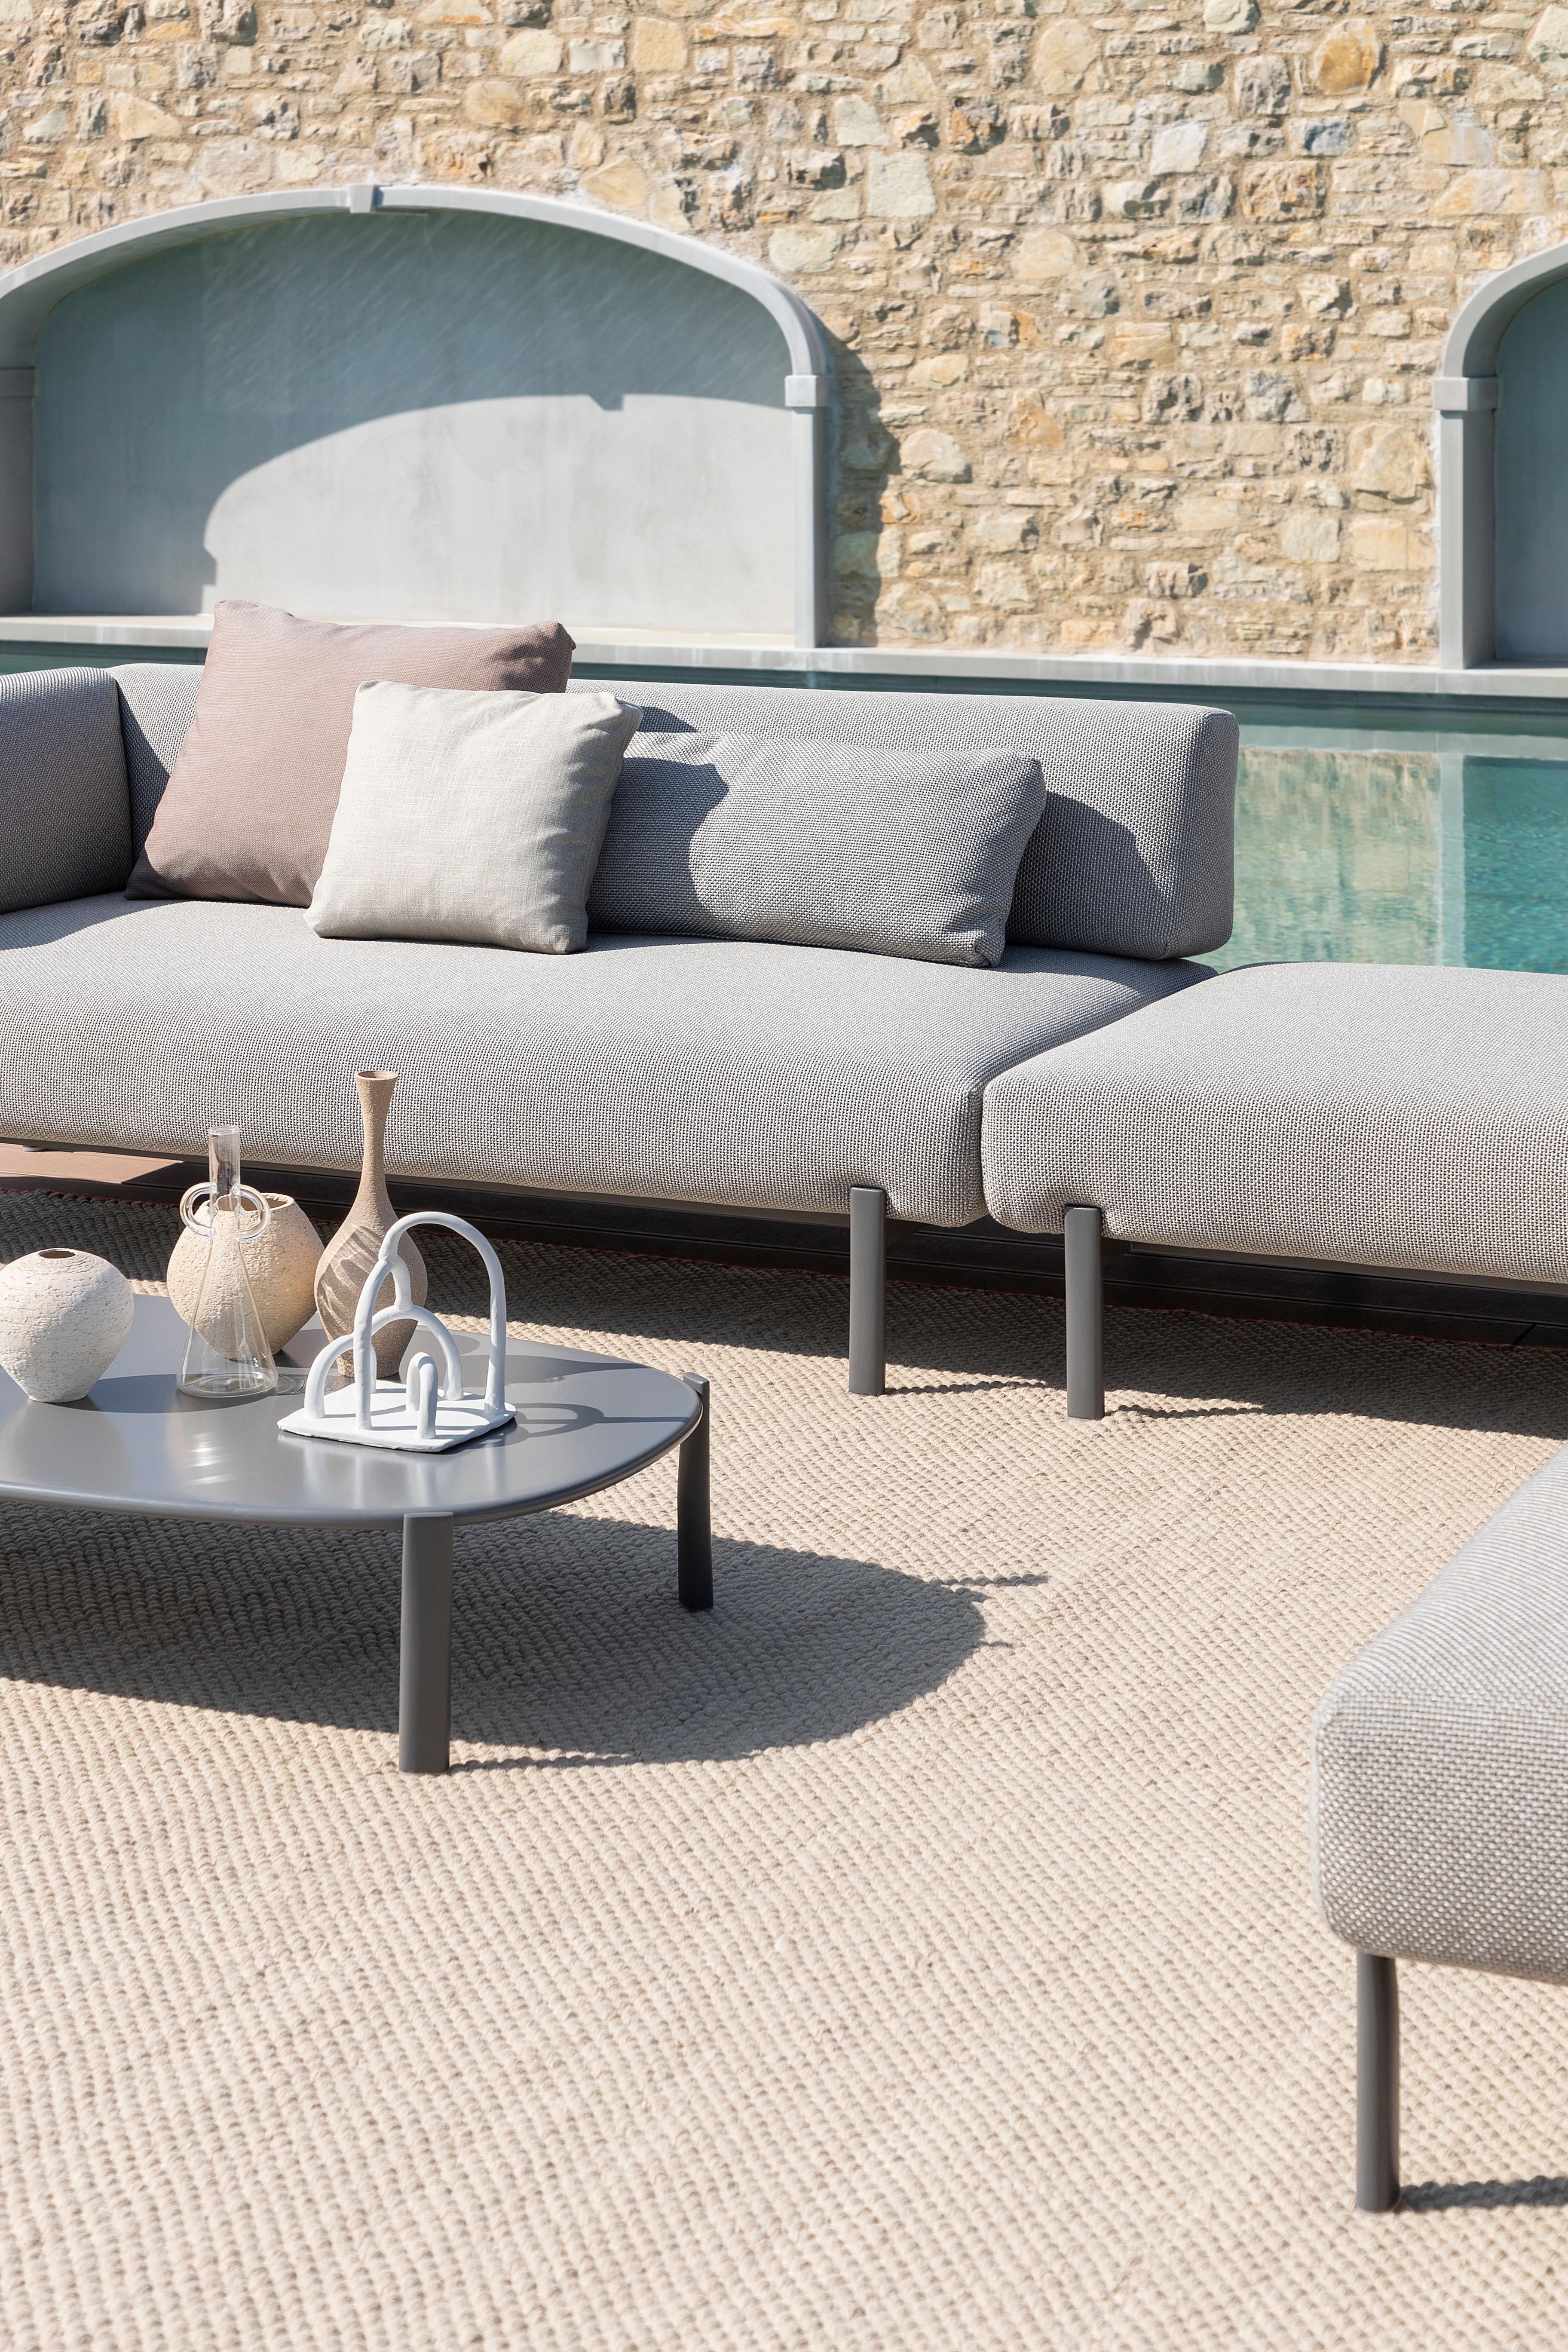 Alias T05_O DX Ten Angular Outdoor Sofa in White w Sand Lacquered Aluminum Frame by PearsonLloyd

Modular corner element for outdoor use with lacquered die-cast aluminium legs and stainless steel frame.Seat, back and armrest with removable cover